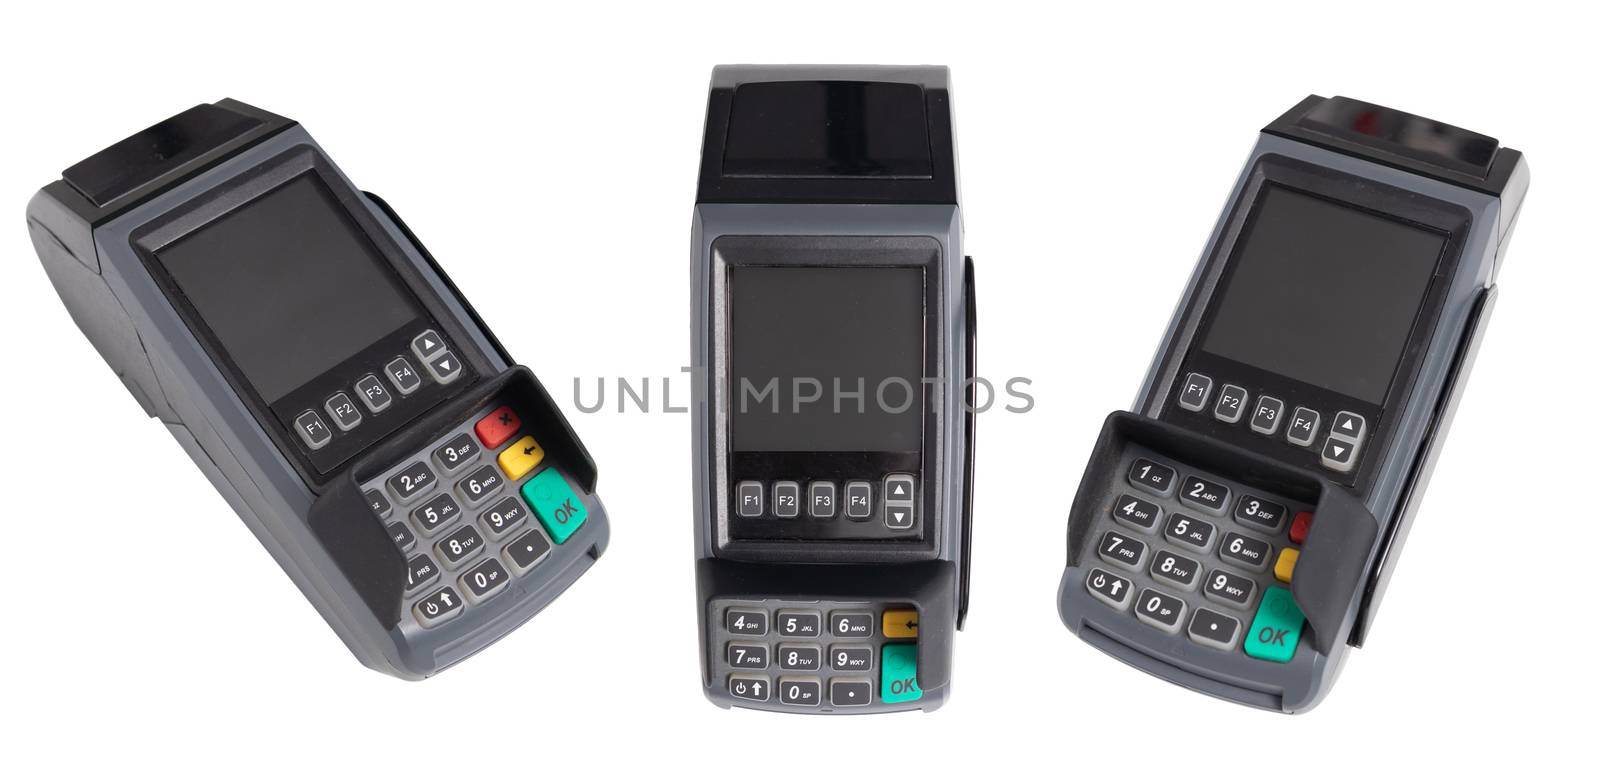 point of sale, credit card reader payment terminal. set of credit card swipe machine from 3 side  isolated on white background with clipping path by asiandelight